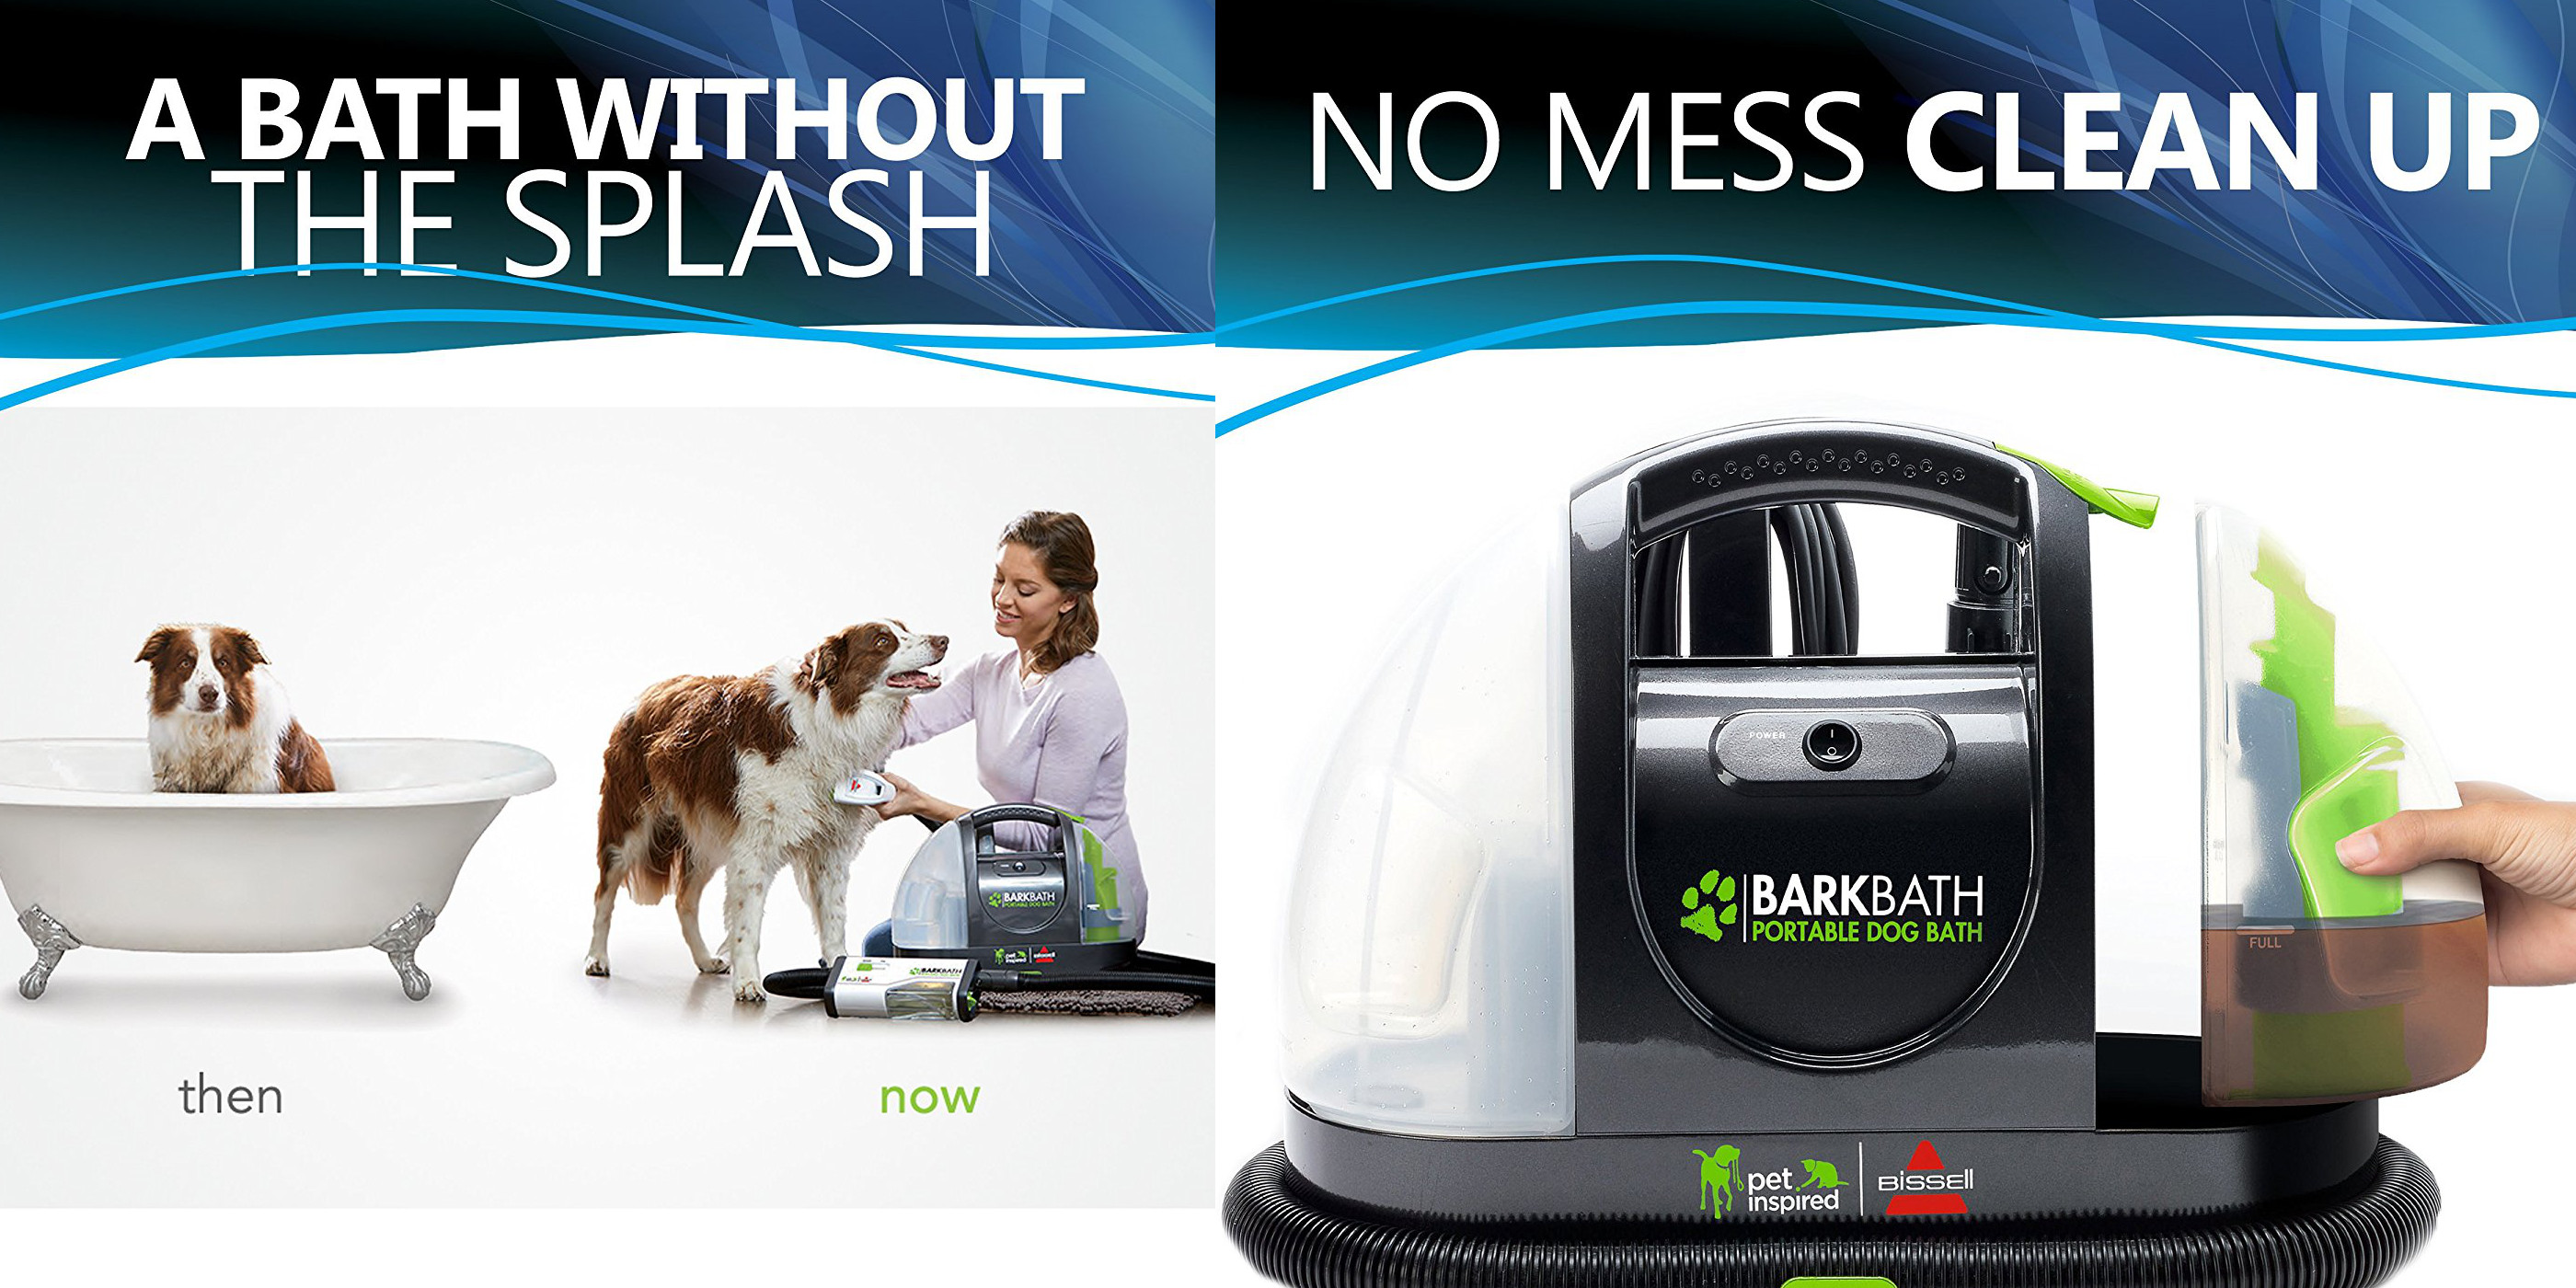 Clean your pet w/o the mess: Bissell Portable BarkBath System for $100